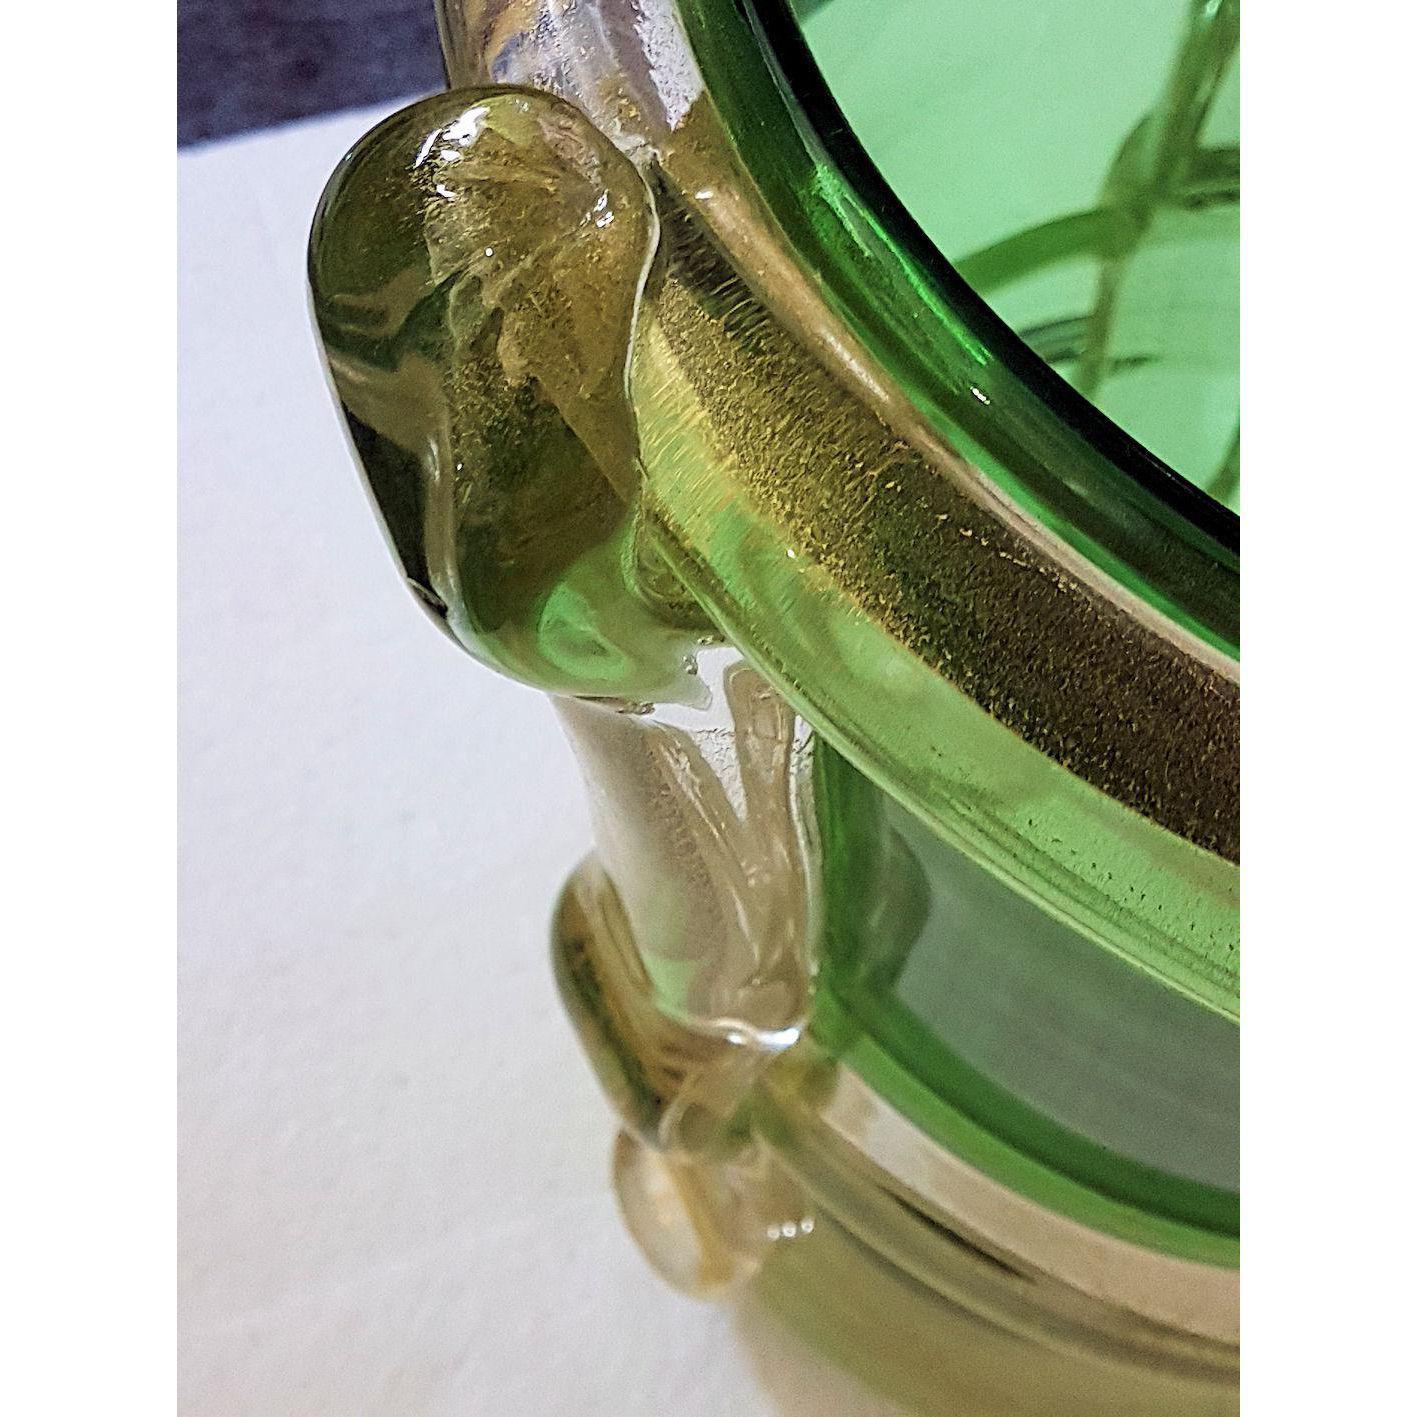 Late 20th Century Pair of Large Green & Gold Murano Glass Vases, Mid-Century Modern Barbini Style